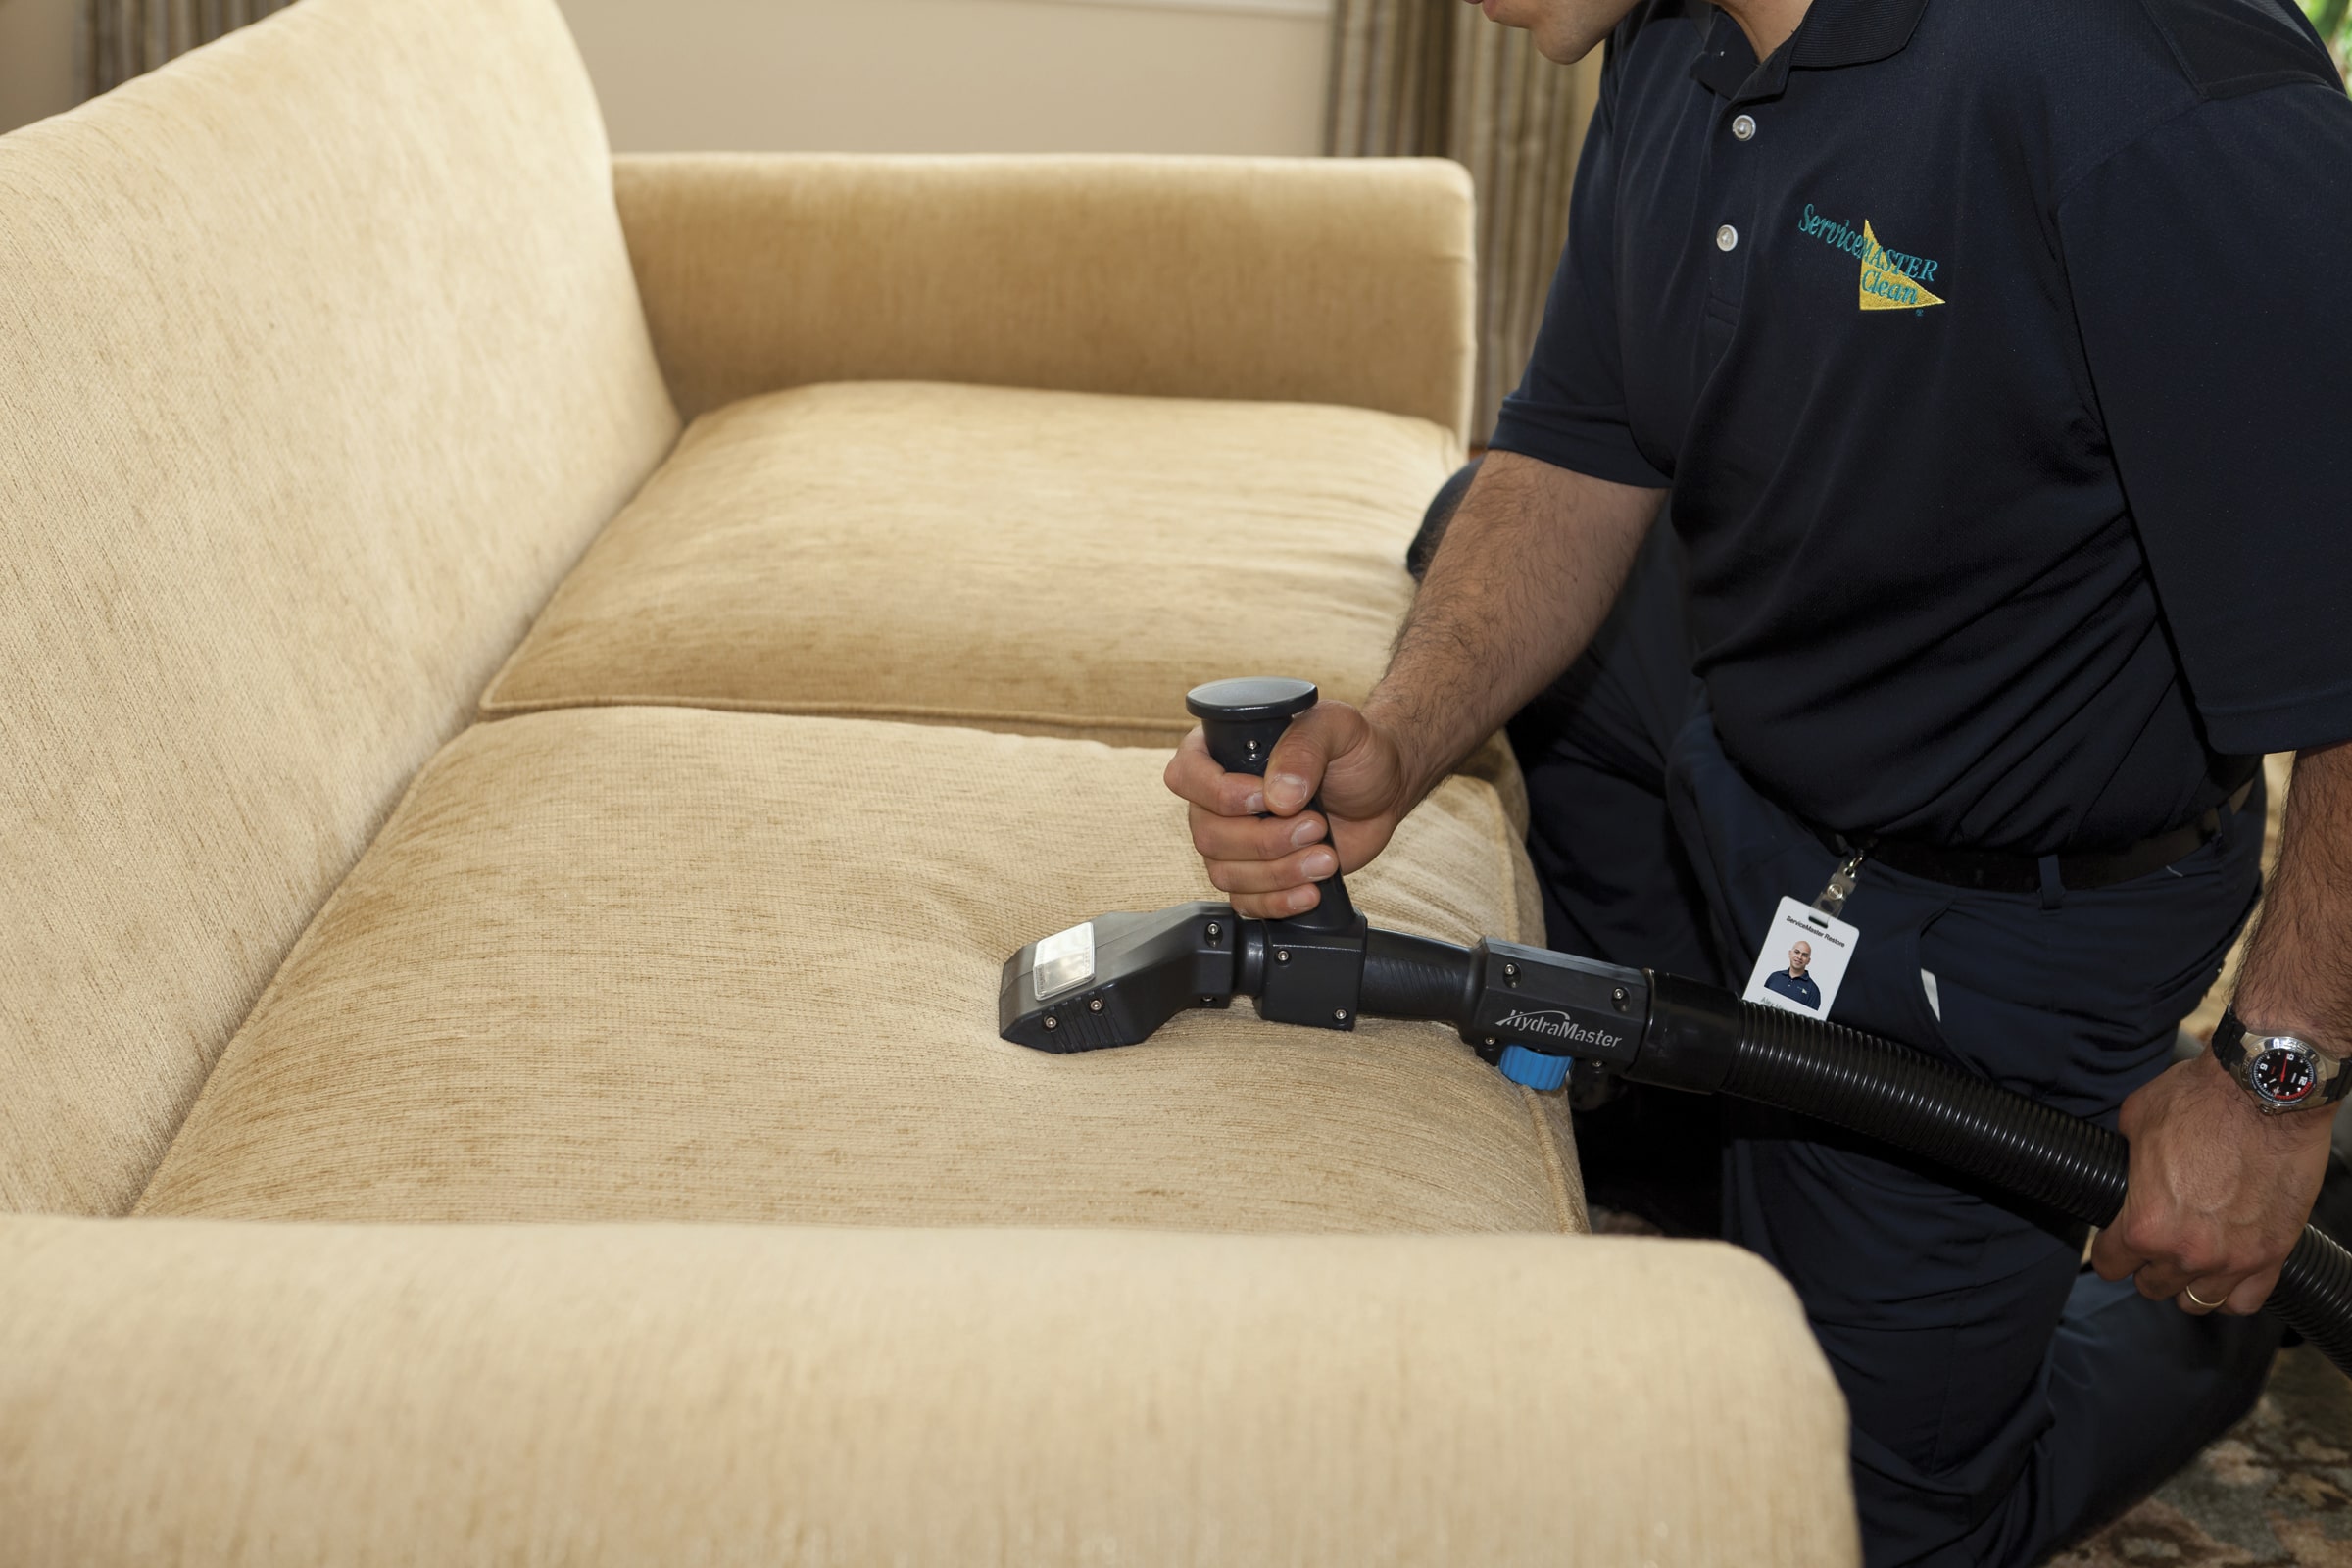 Upholstery cleaning service